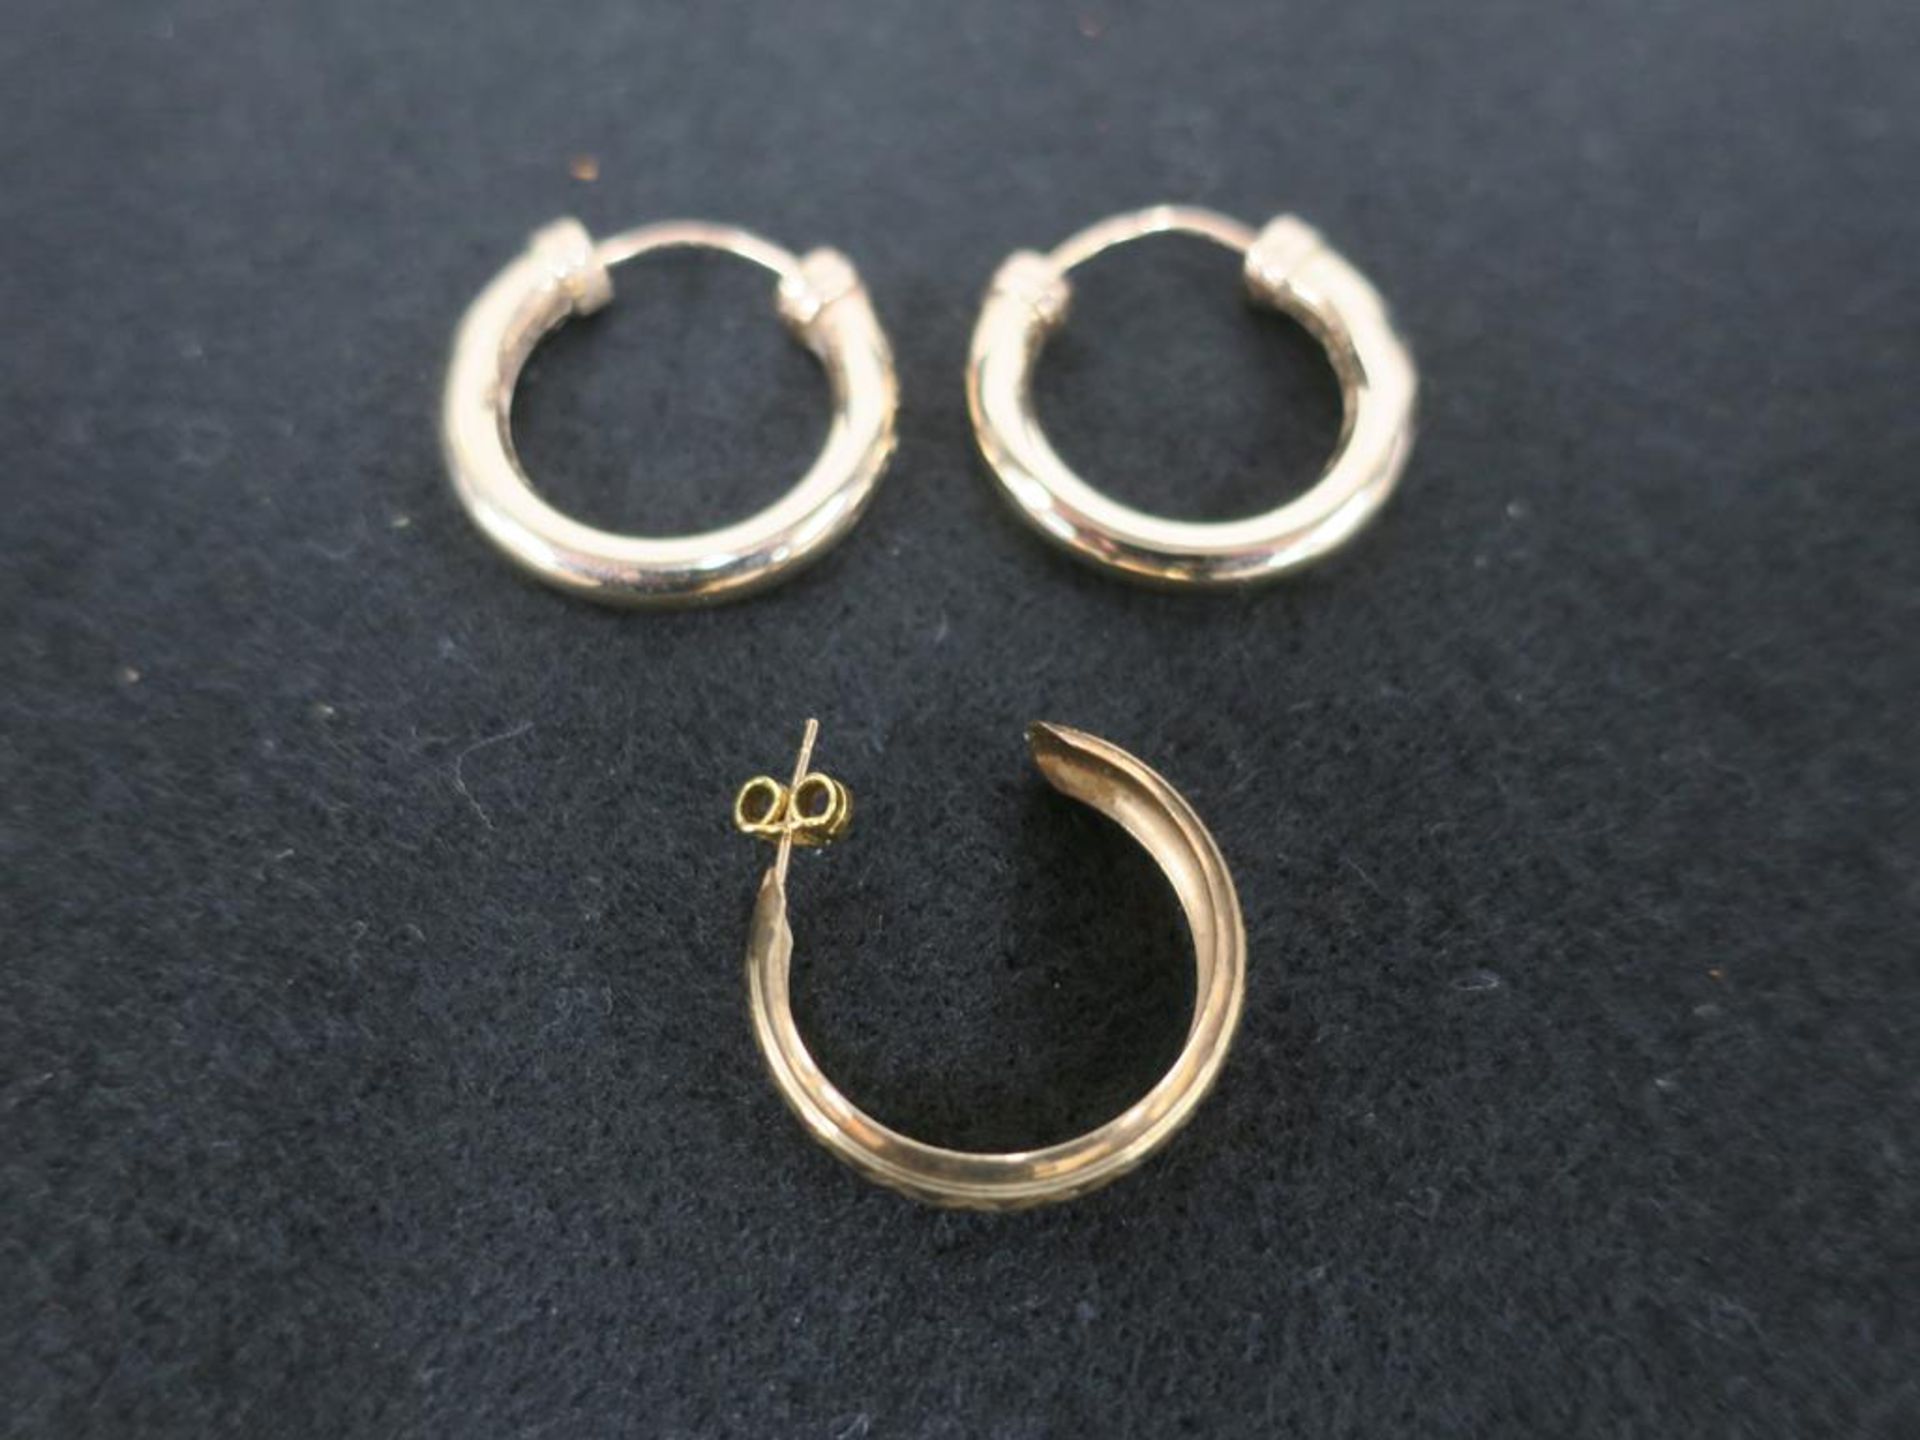 A Pair of 9ct Gold Earrings and a Single Earring With Gold Clip (est £20-£40)